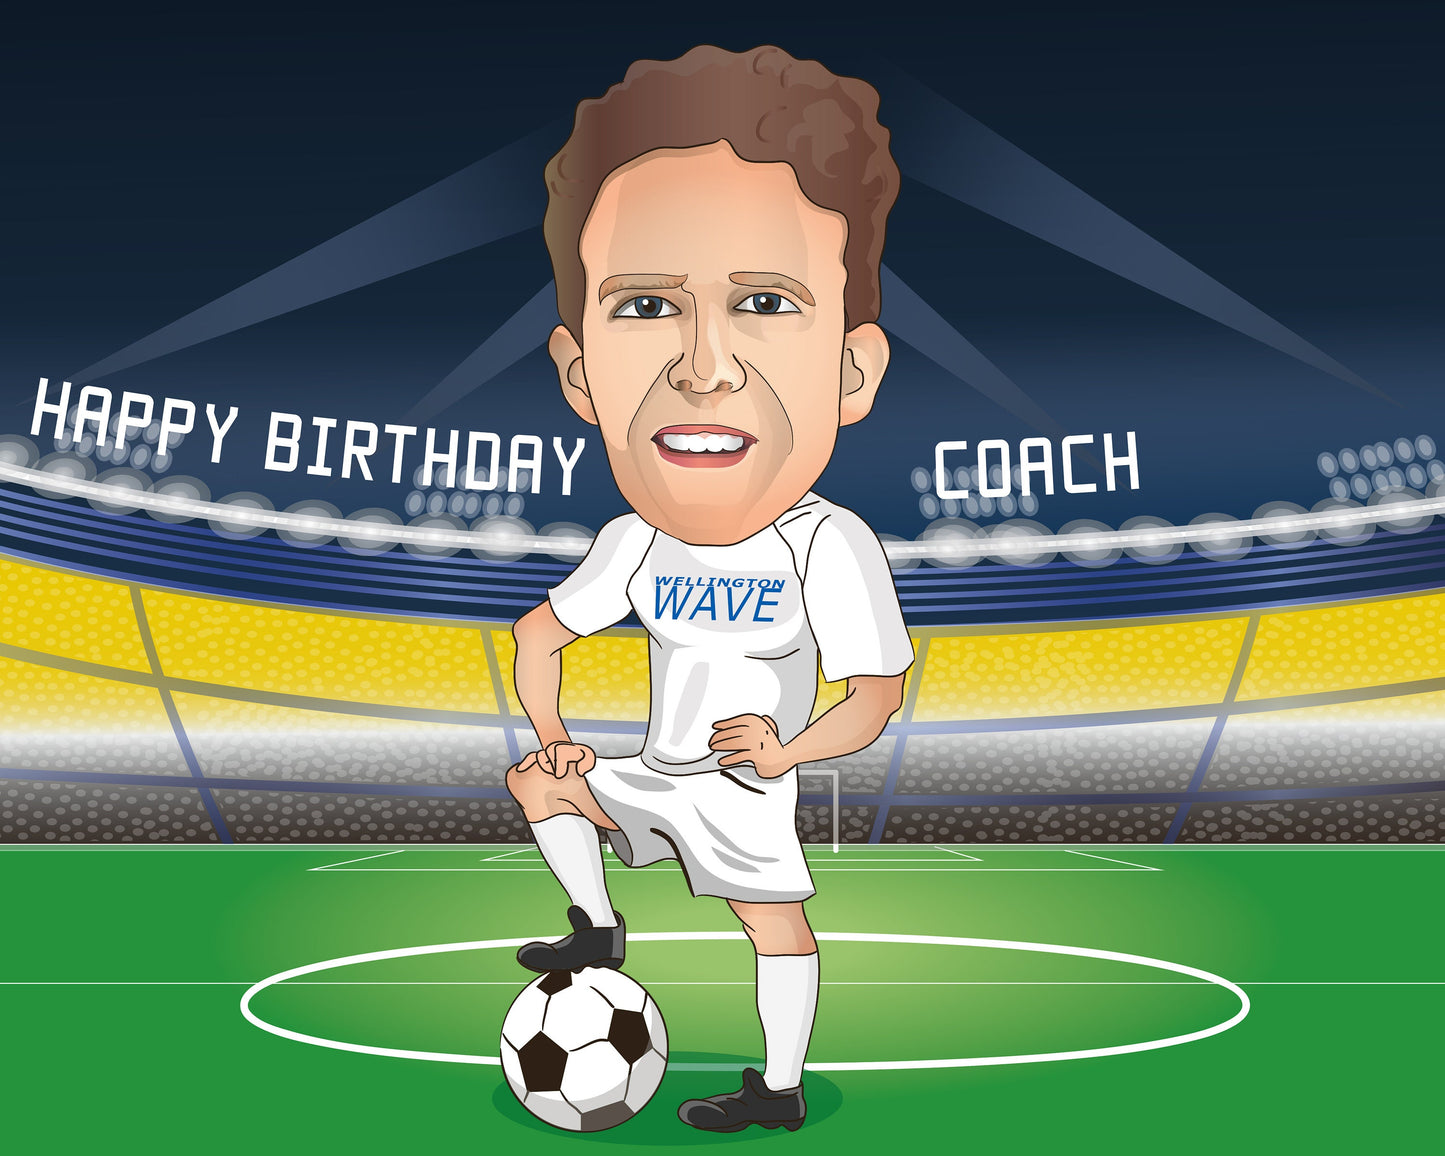 Soccer Coach Gift - Custom Caricature Portrait From Your Photo/Football Coach Gift